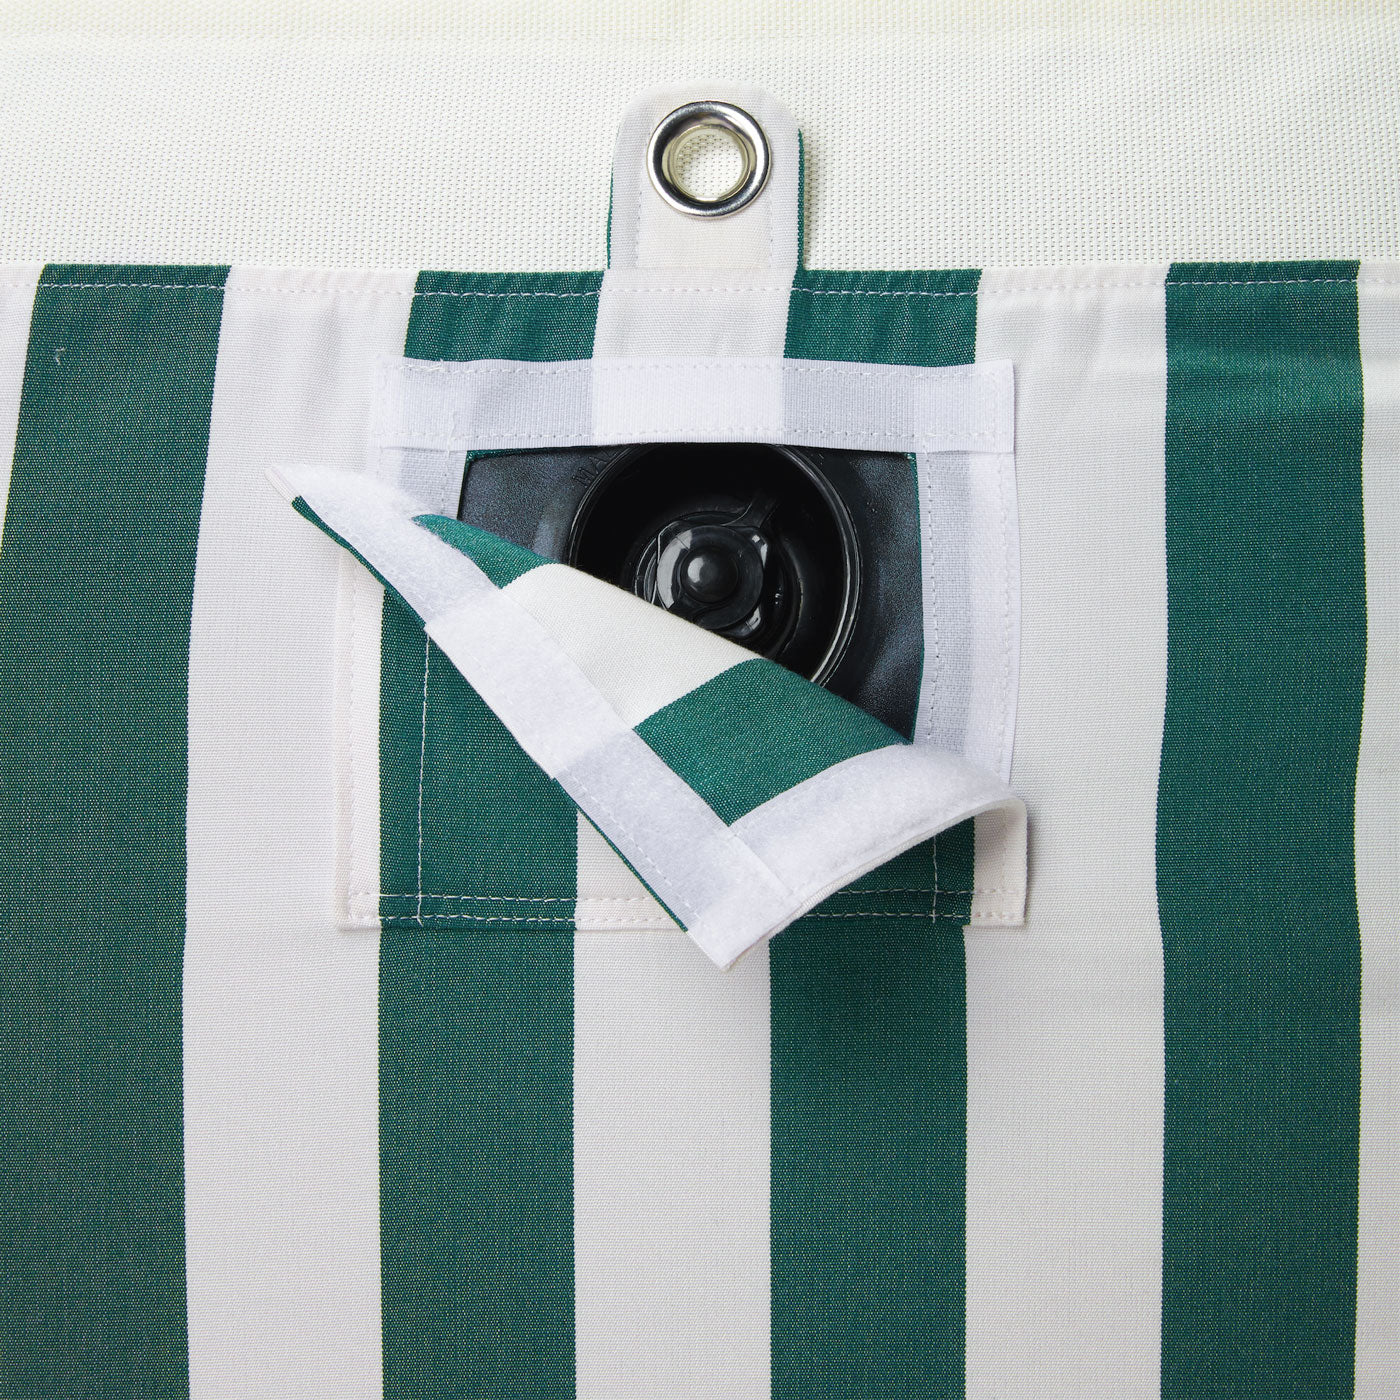 A pool float for an adult in a green and white stripe fabric upside down with a eyelet and velcro window showing a boston valve.  